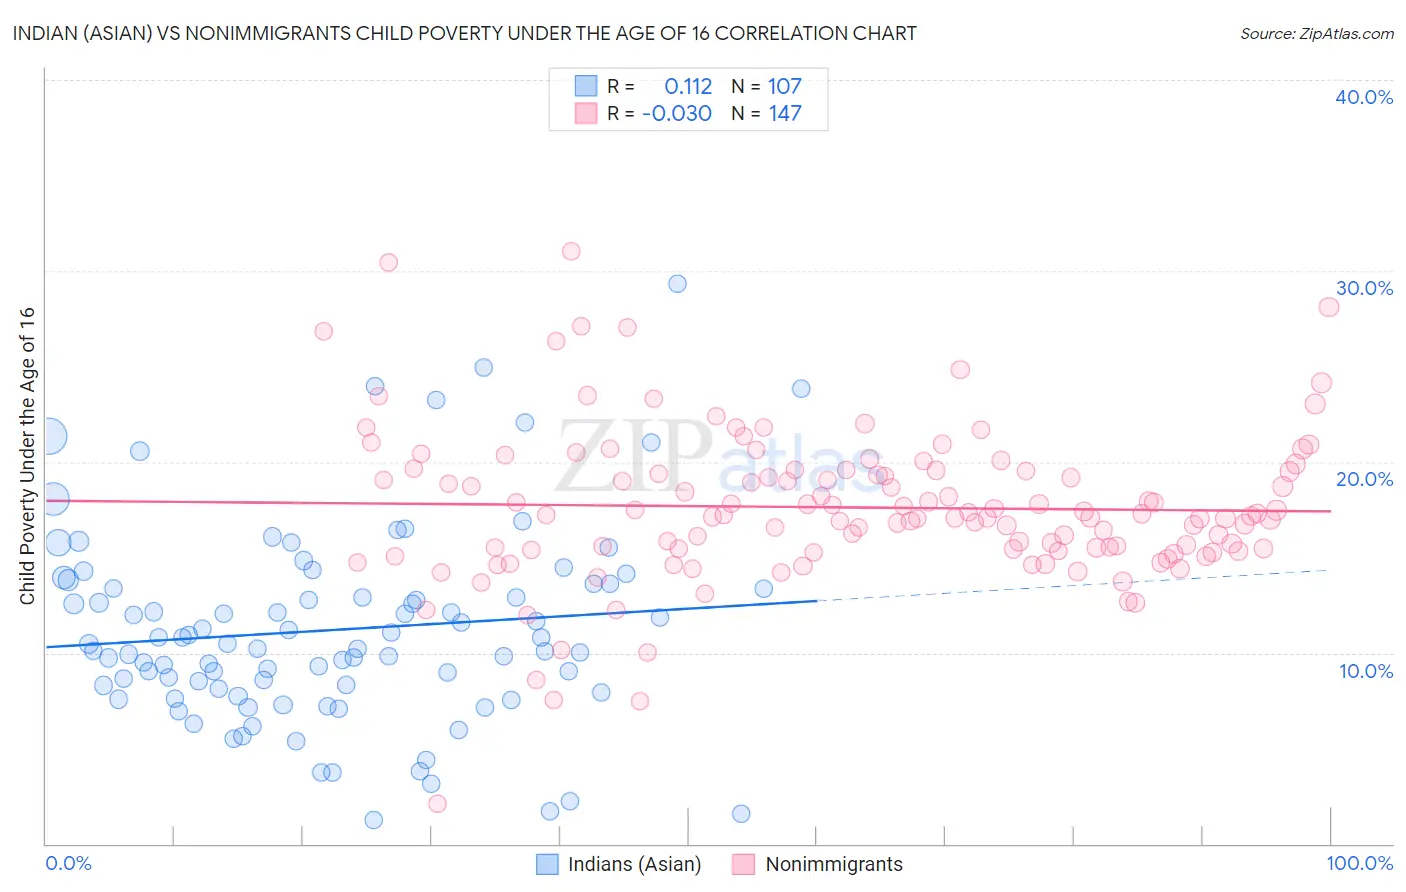 Indian (Asian) vs Nonimmigrants Child Poverty Under the Age of 16